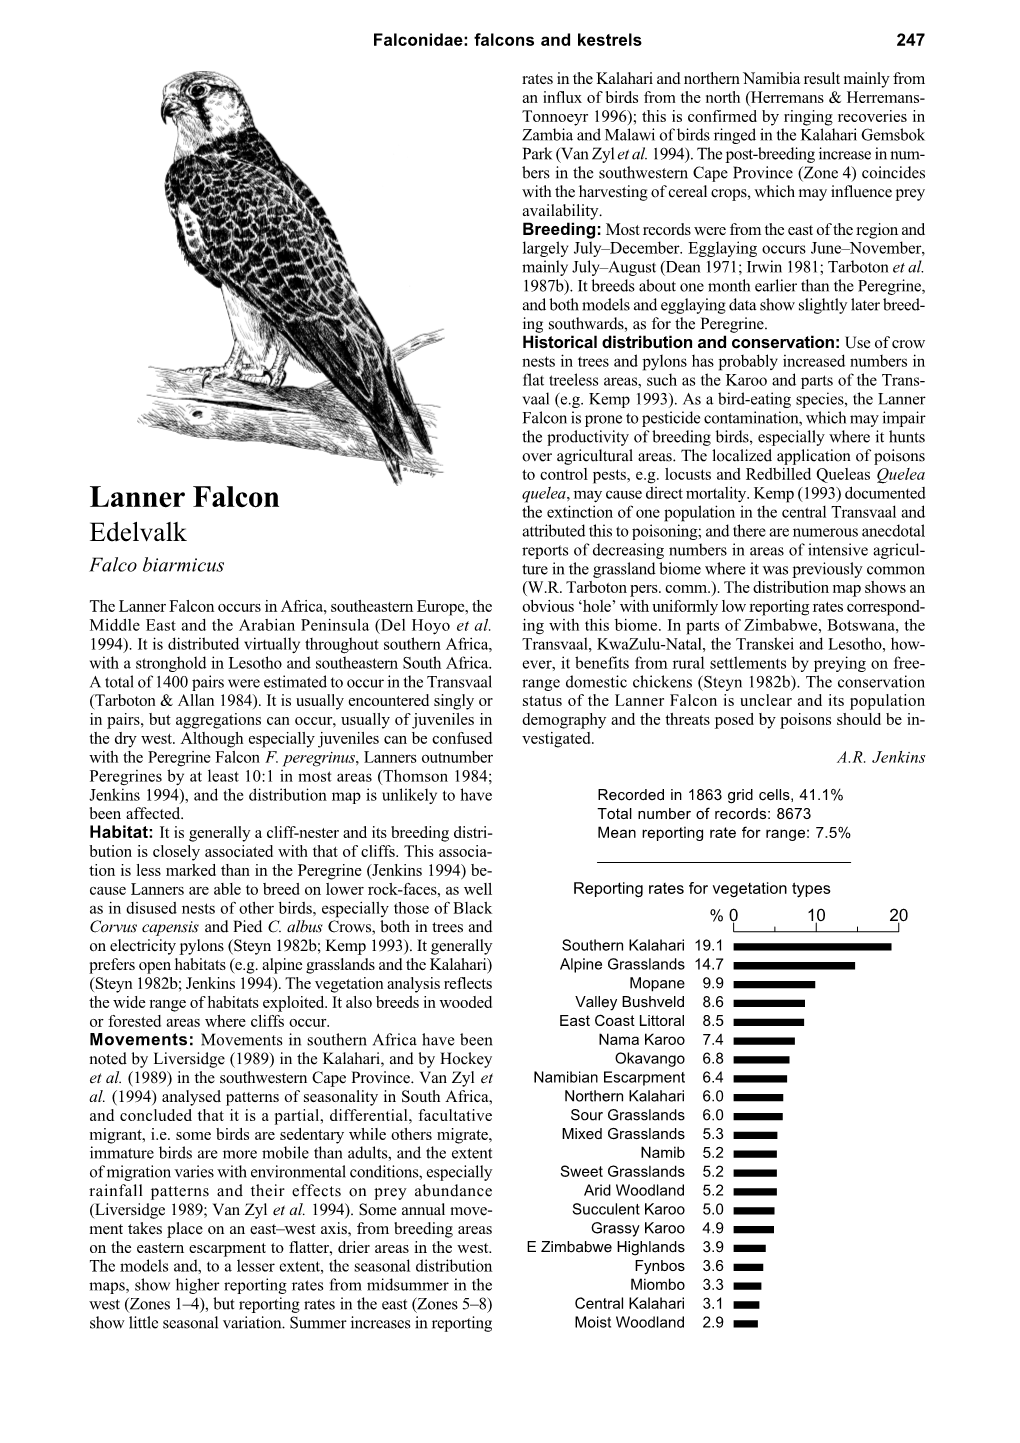 Lanner Falcon Is Prone to Pesticide Contamination, Which May Impair the Productivity of Breeding Birds, Especially Where It Hunts Over Agricultural Areas